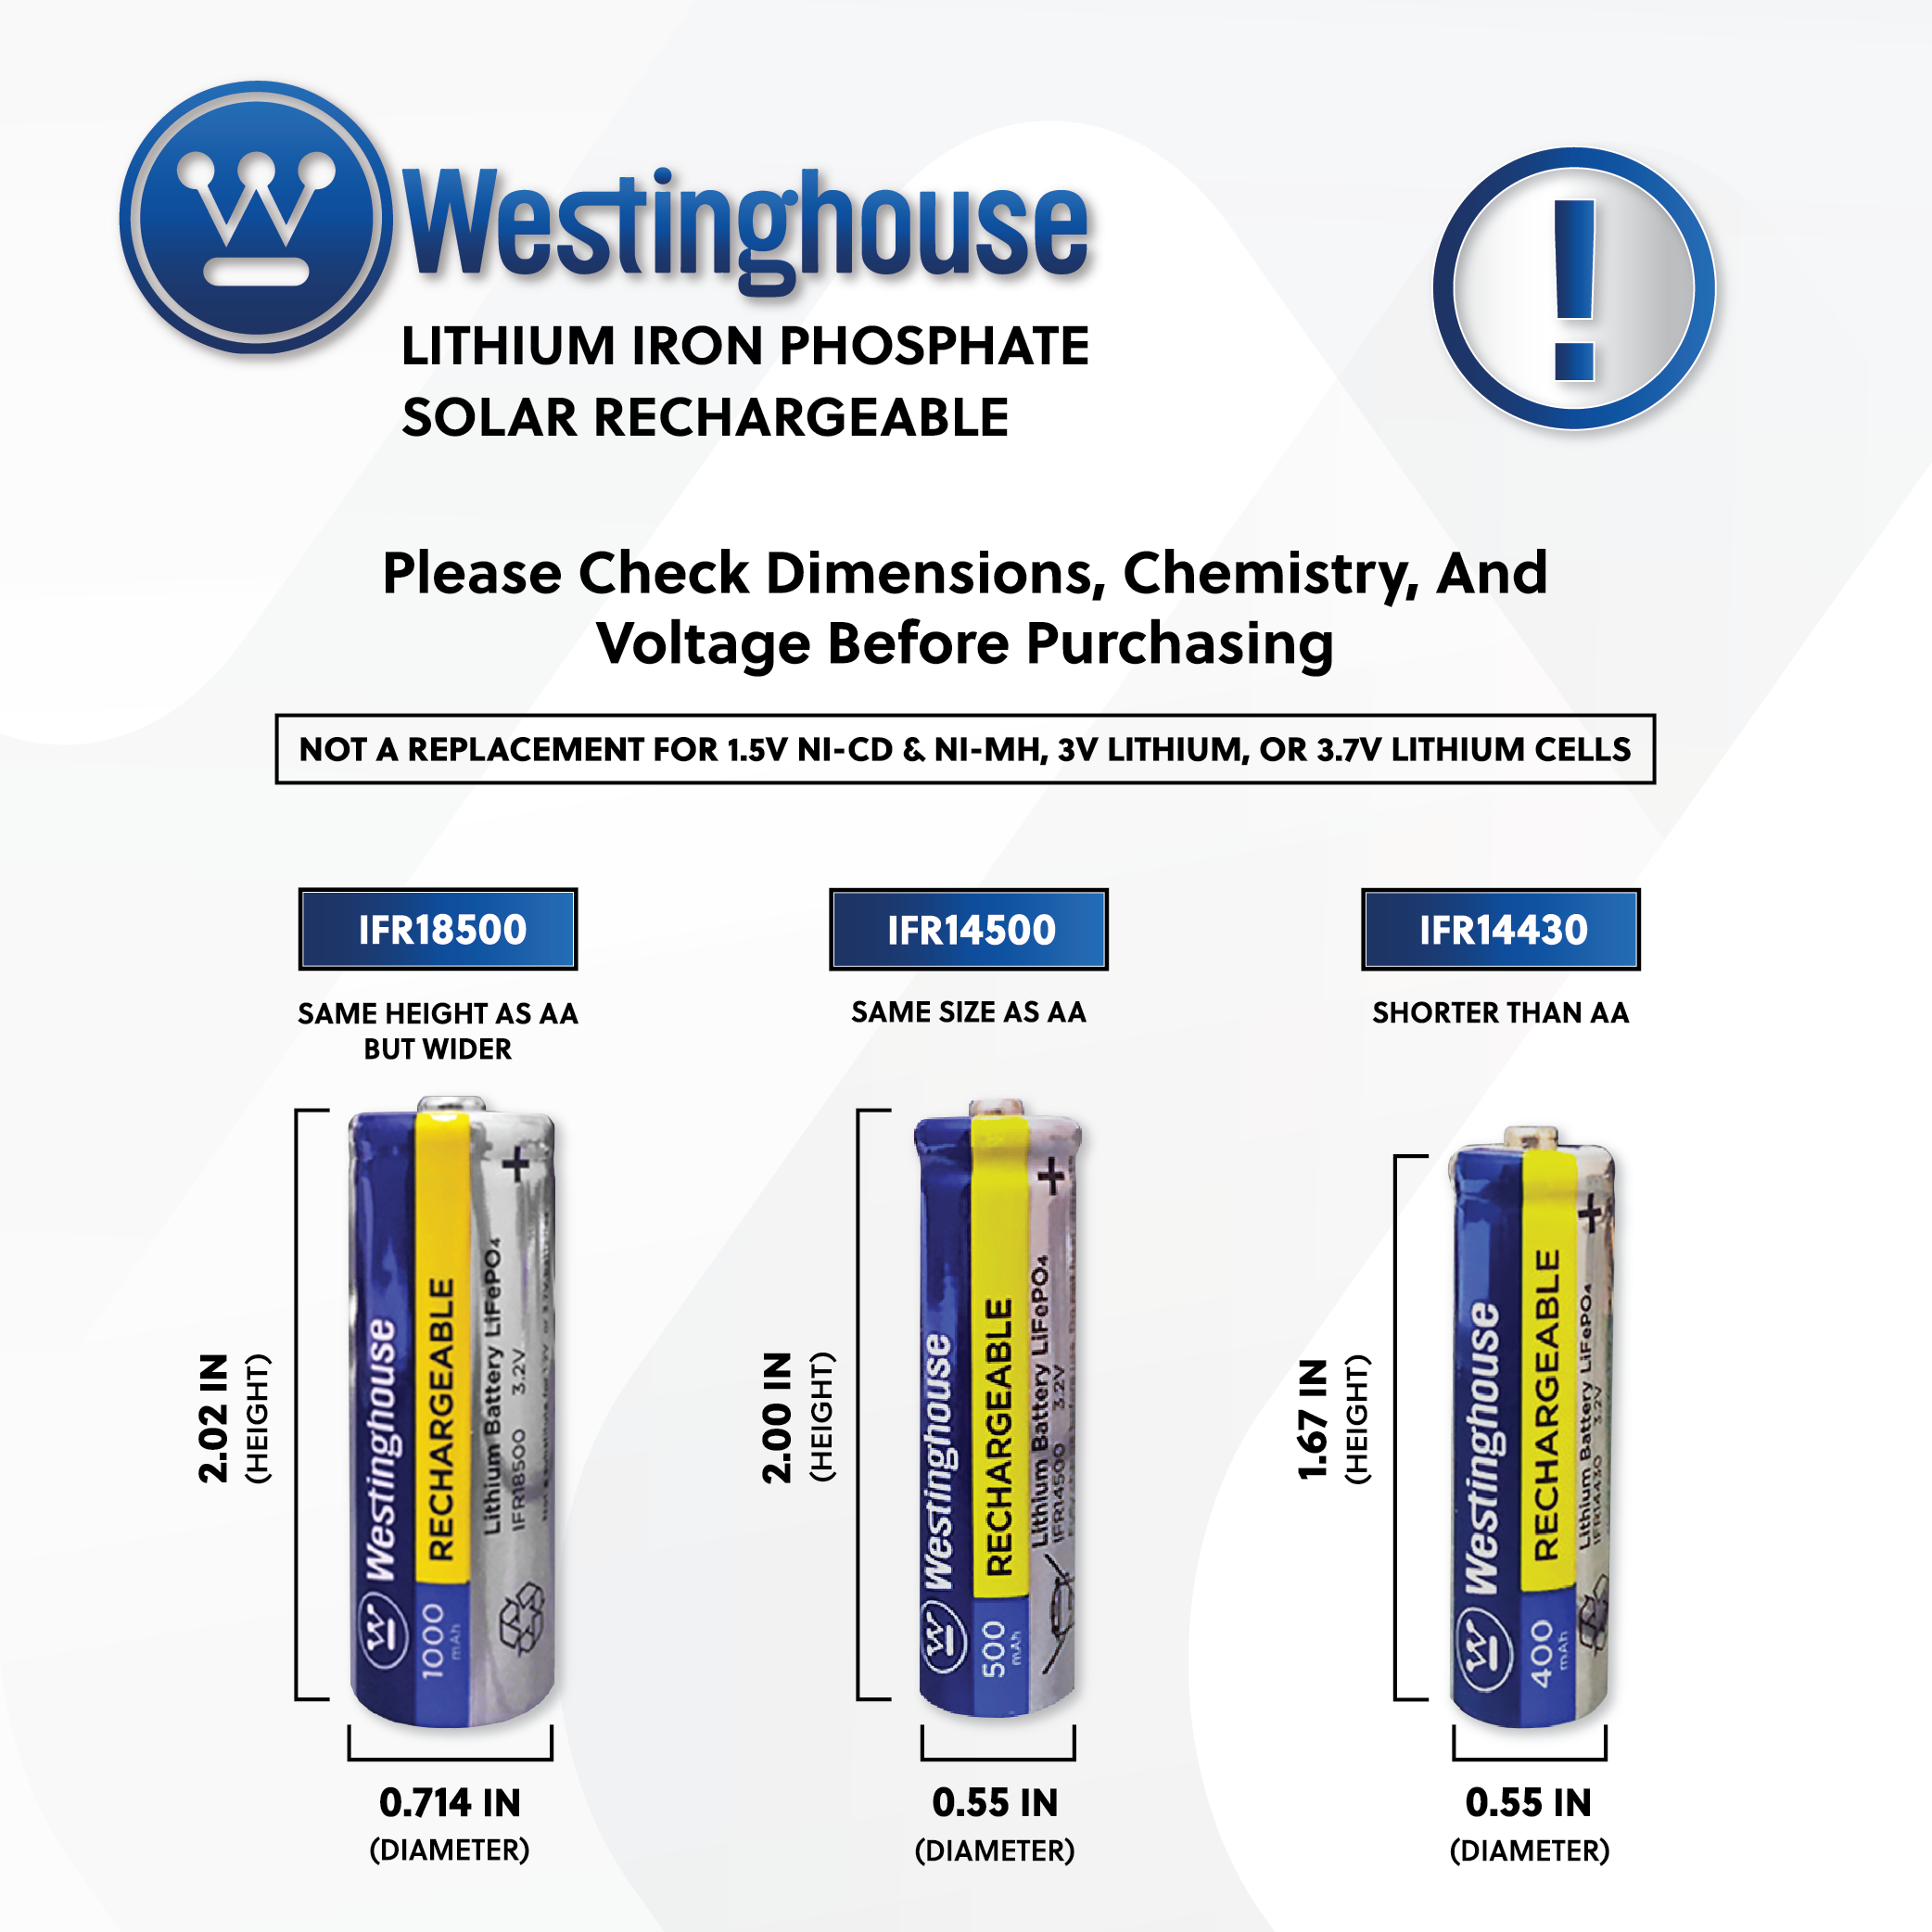 Westinghouse IFR14500 Lithium Iron Phosphate Rechargeable Battery 500mAh Blister Pack of 4